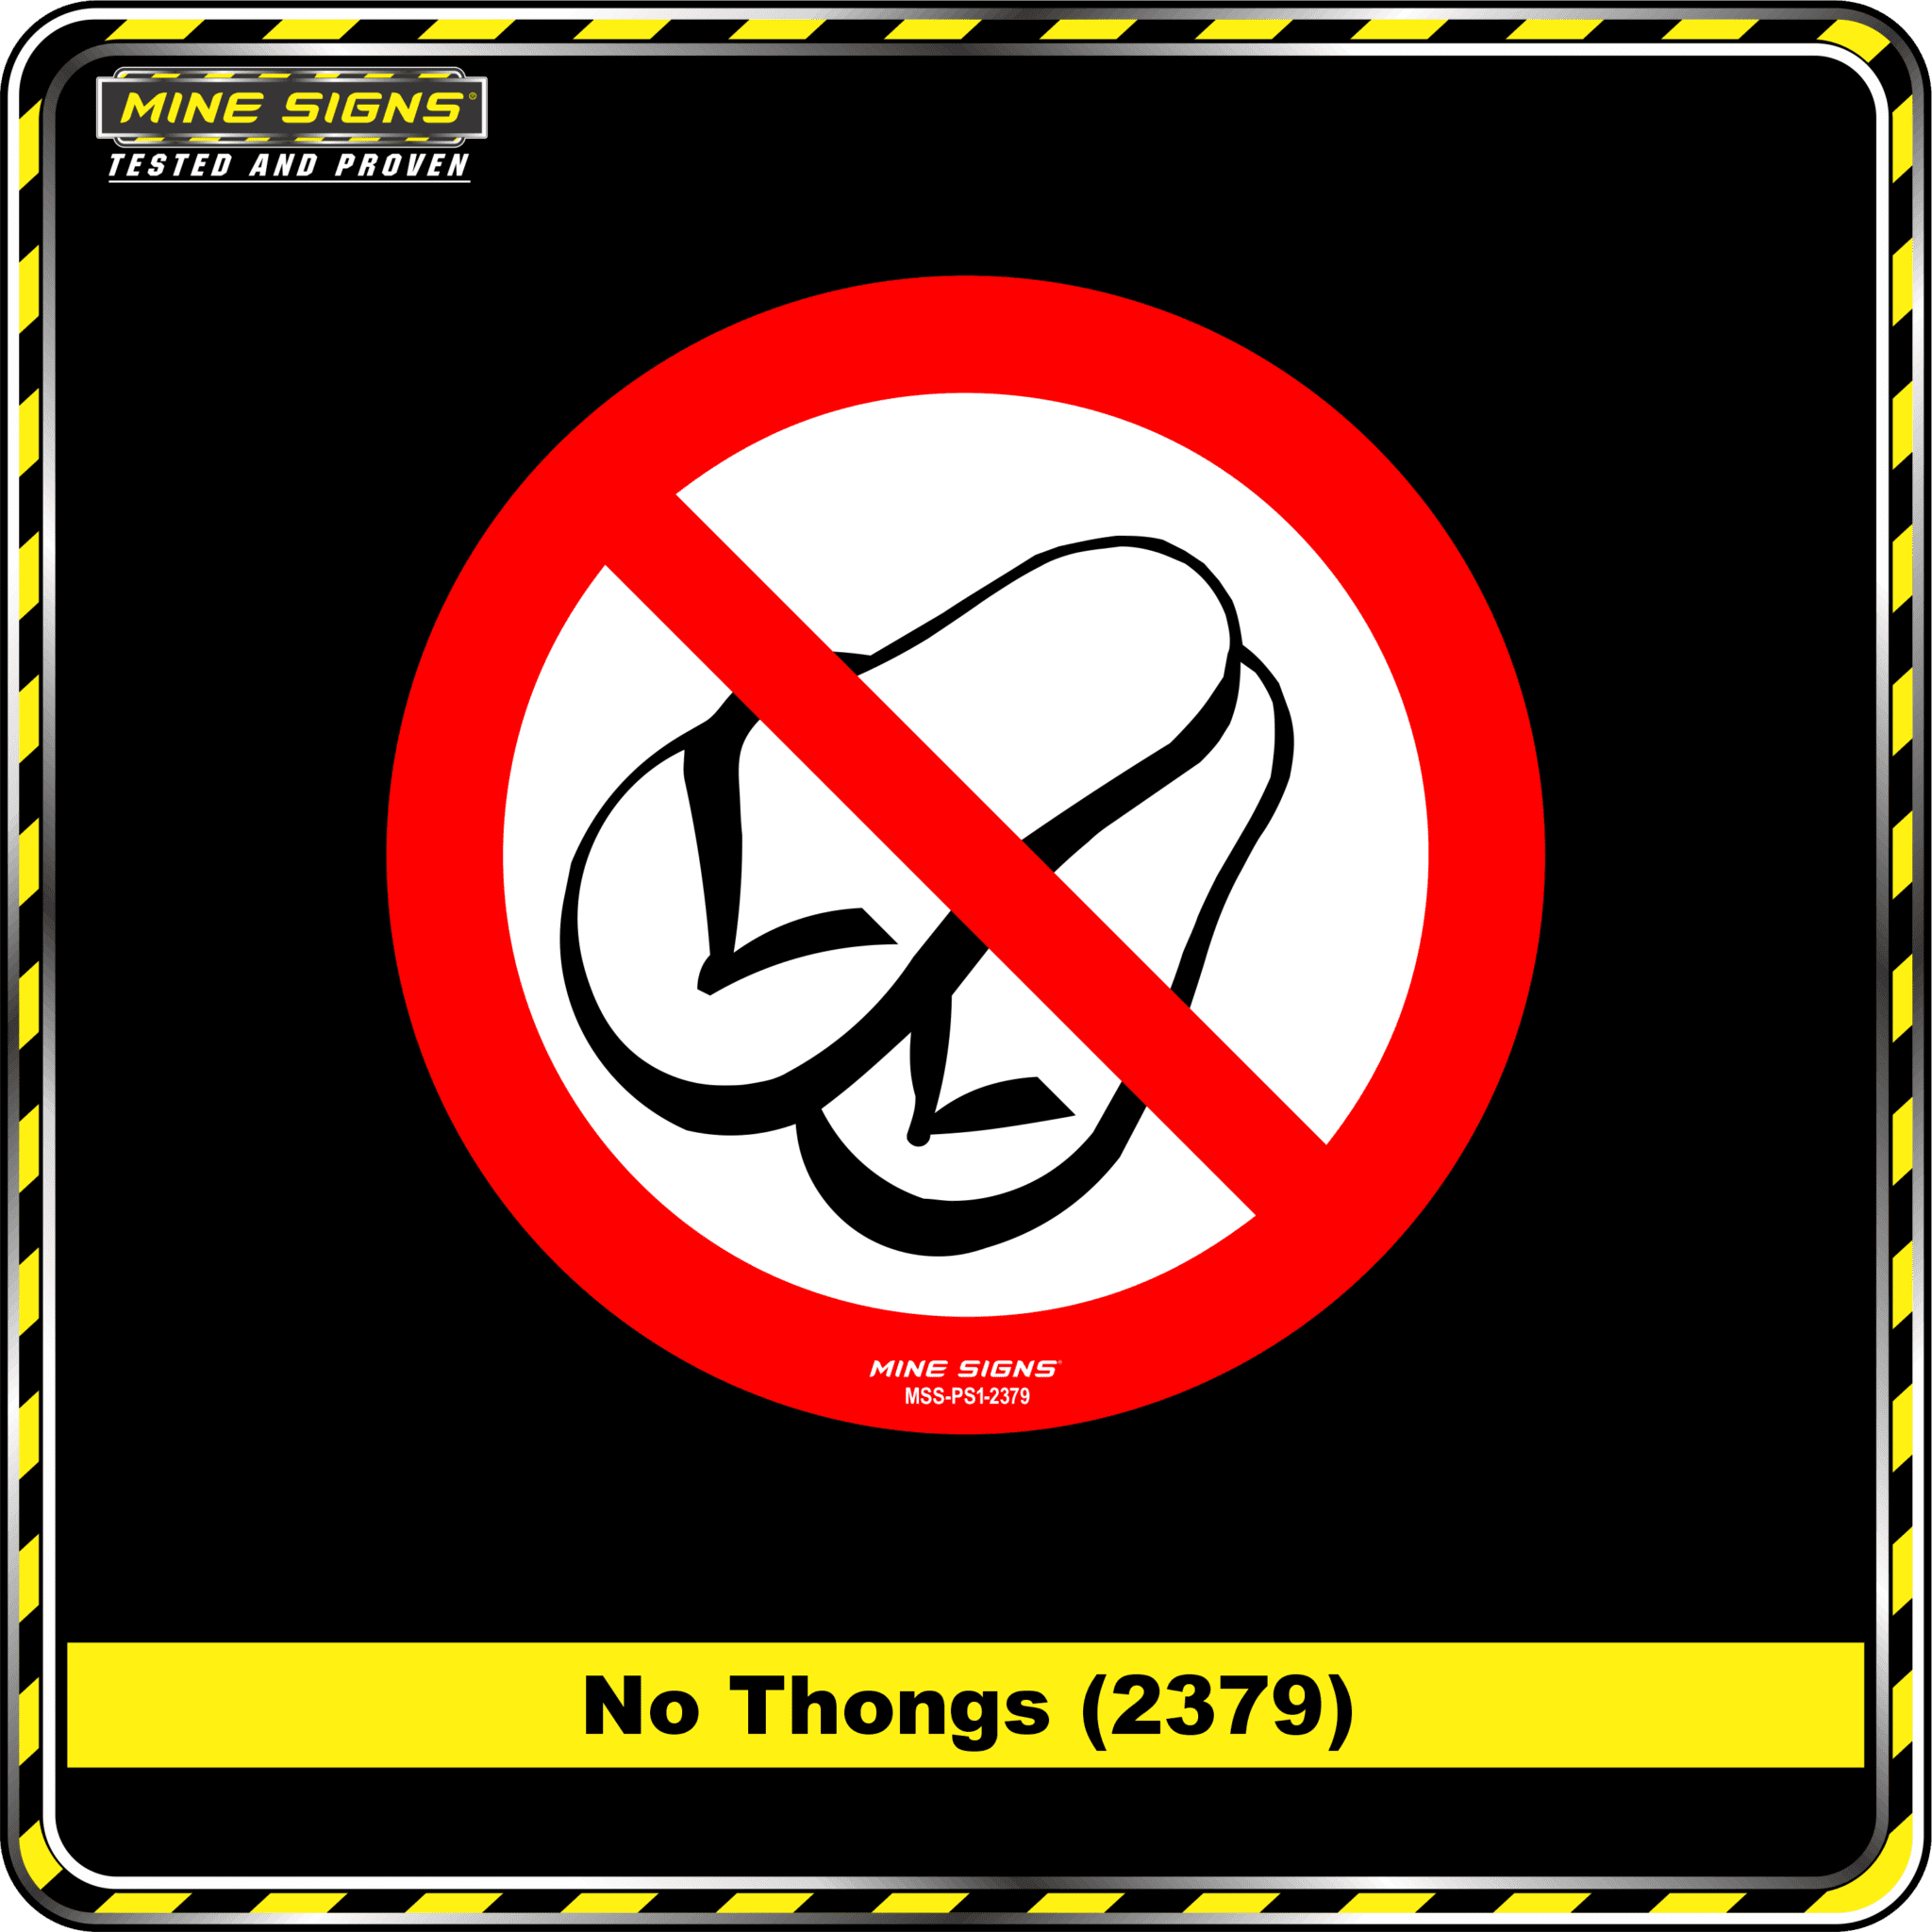 MS - Product Background - Safety Signs - No Thongs 2379